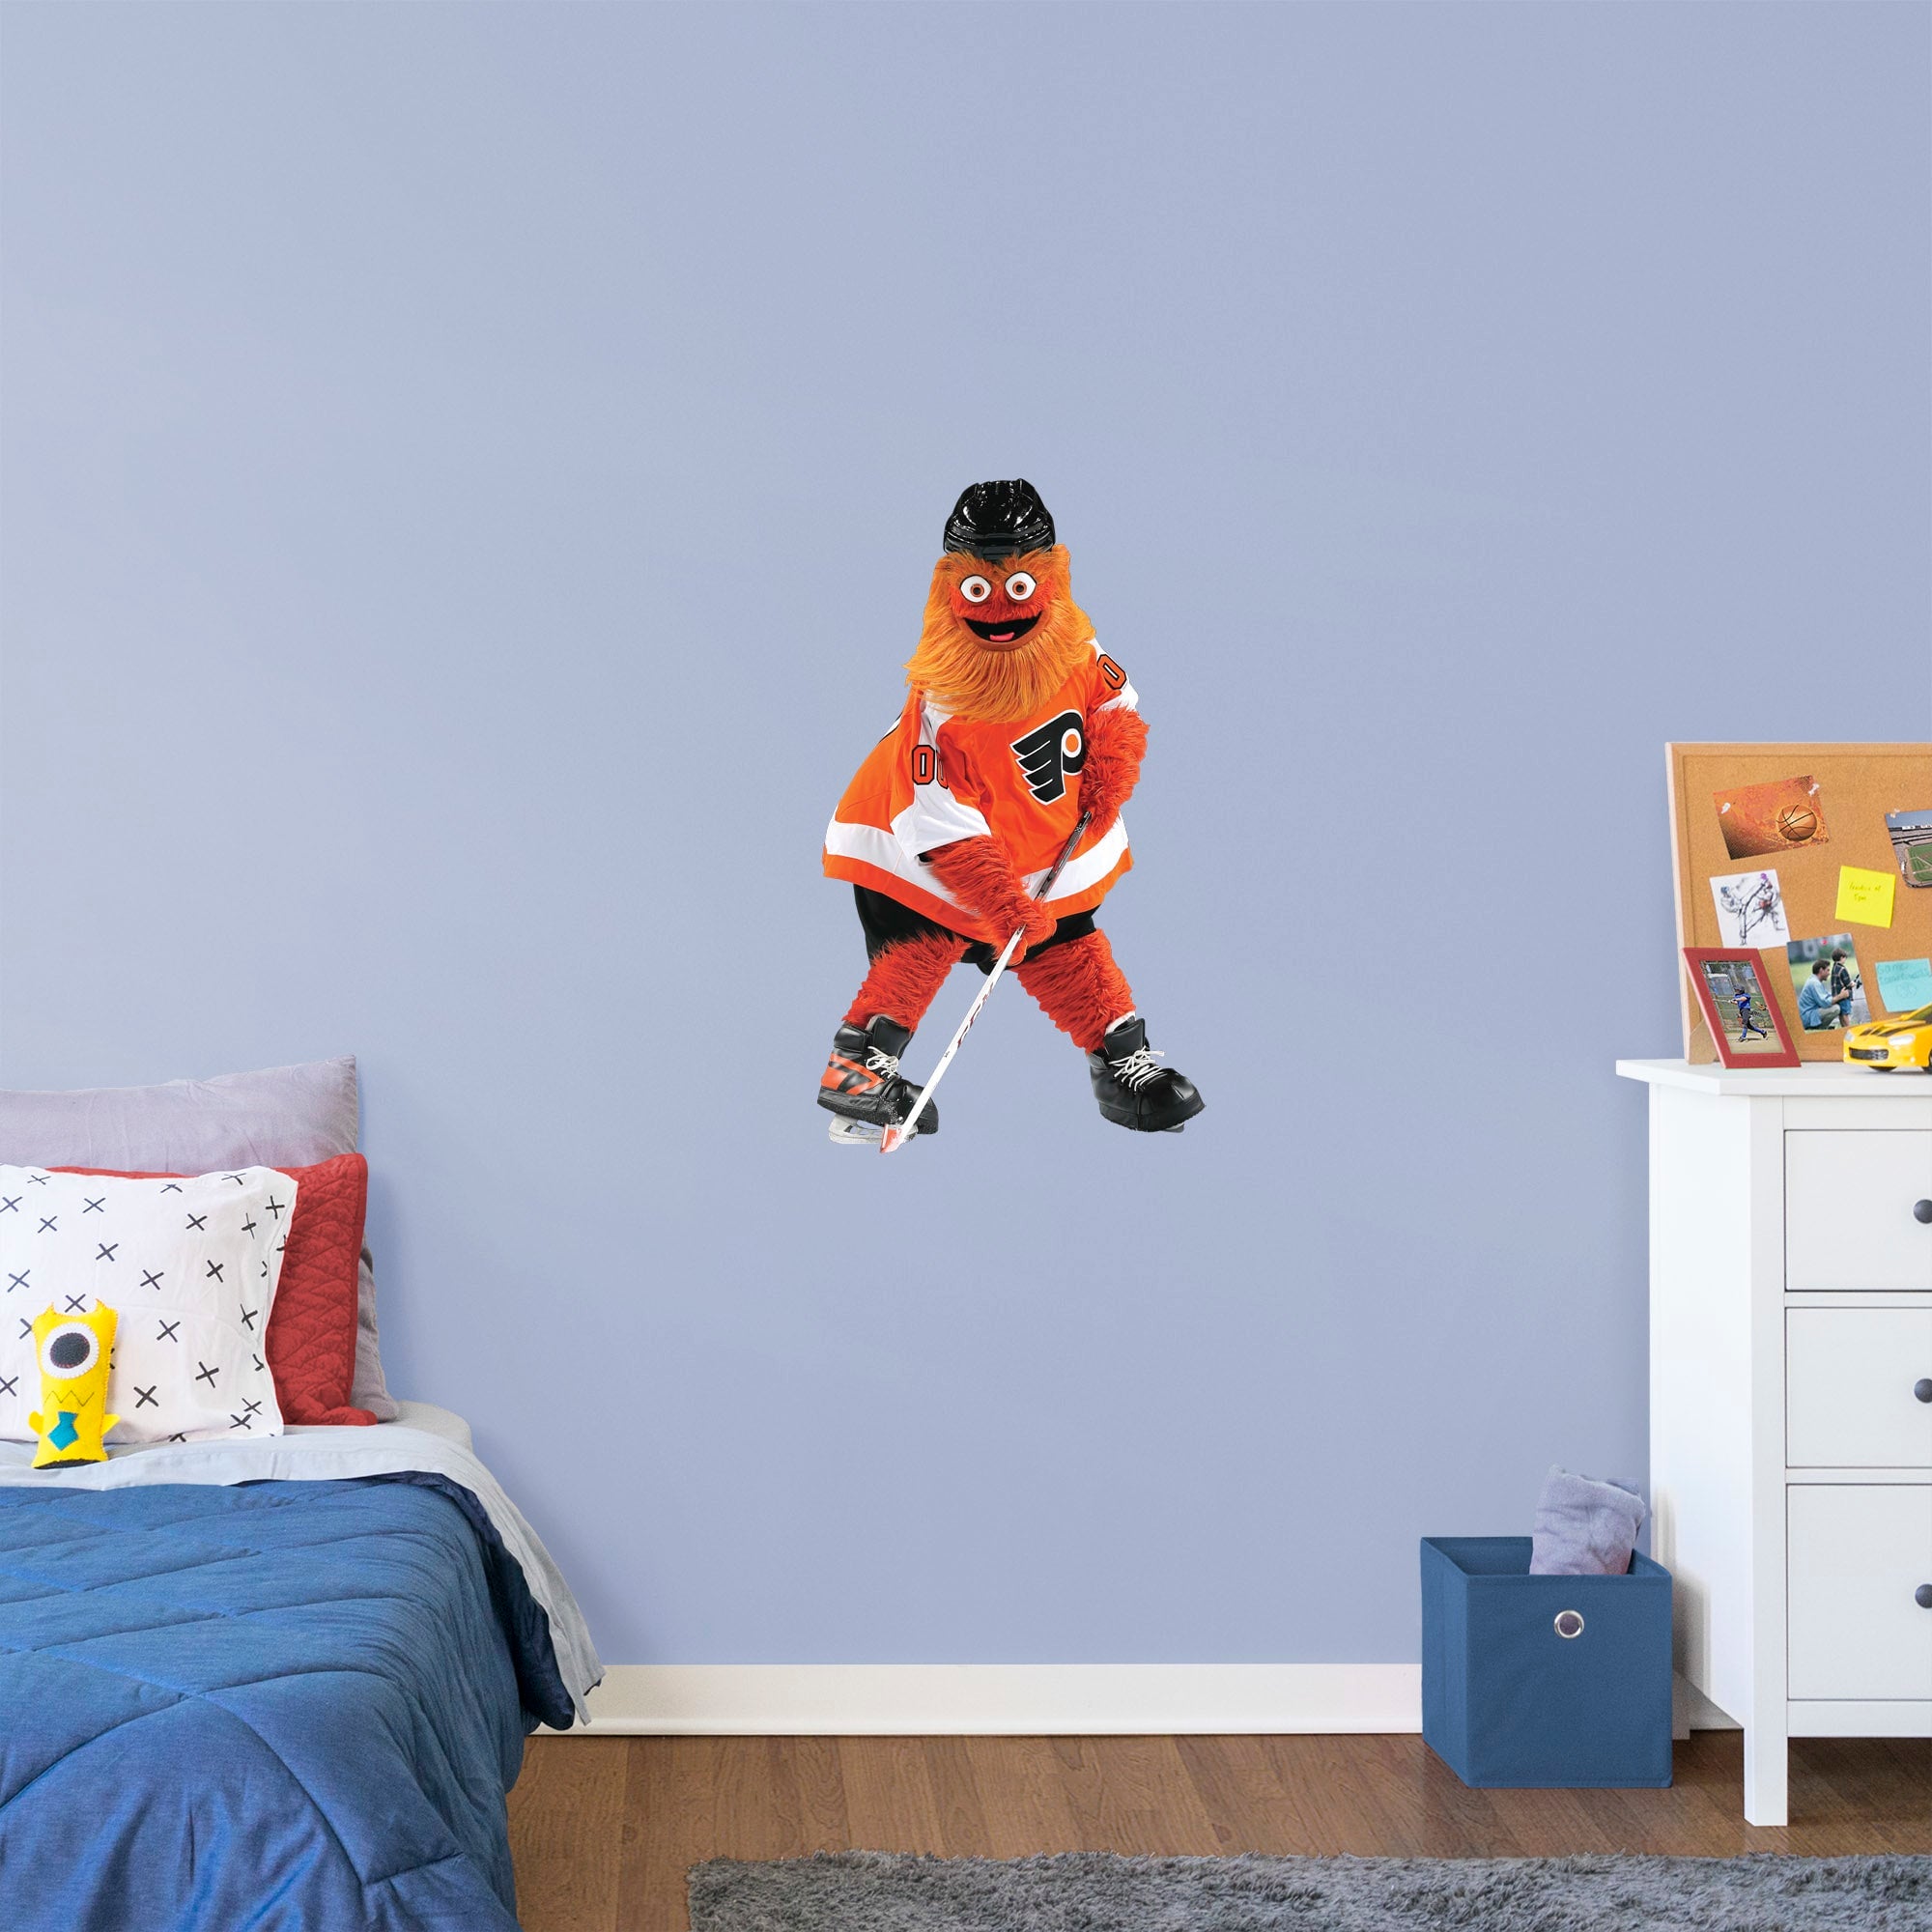 Philadelphia Flyers: Gritty Mascot - Officially Licensed NHL Removable Wall Decal XL by Fathead | Vinyl